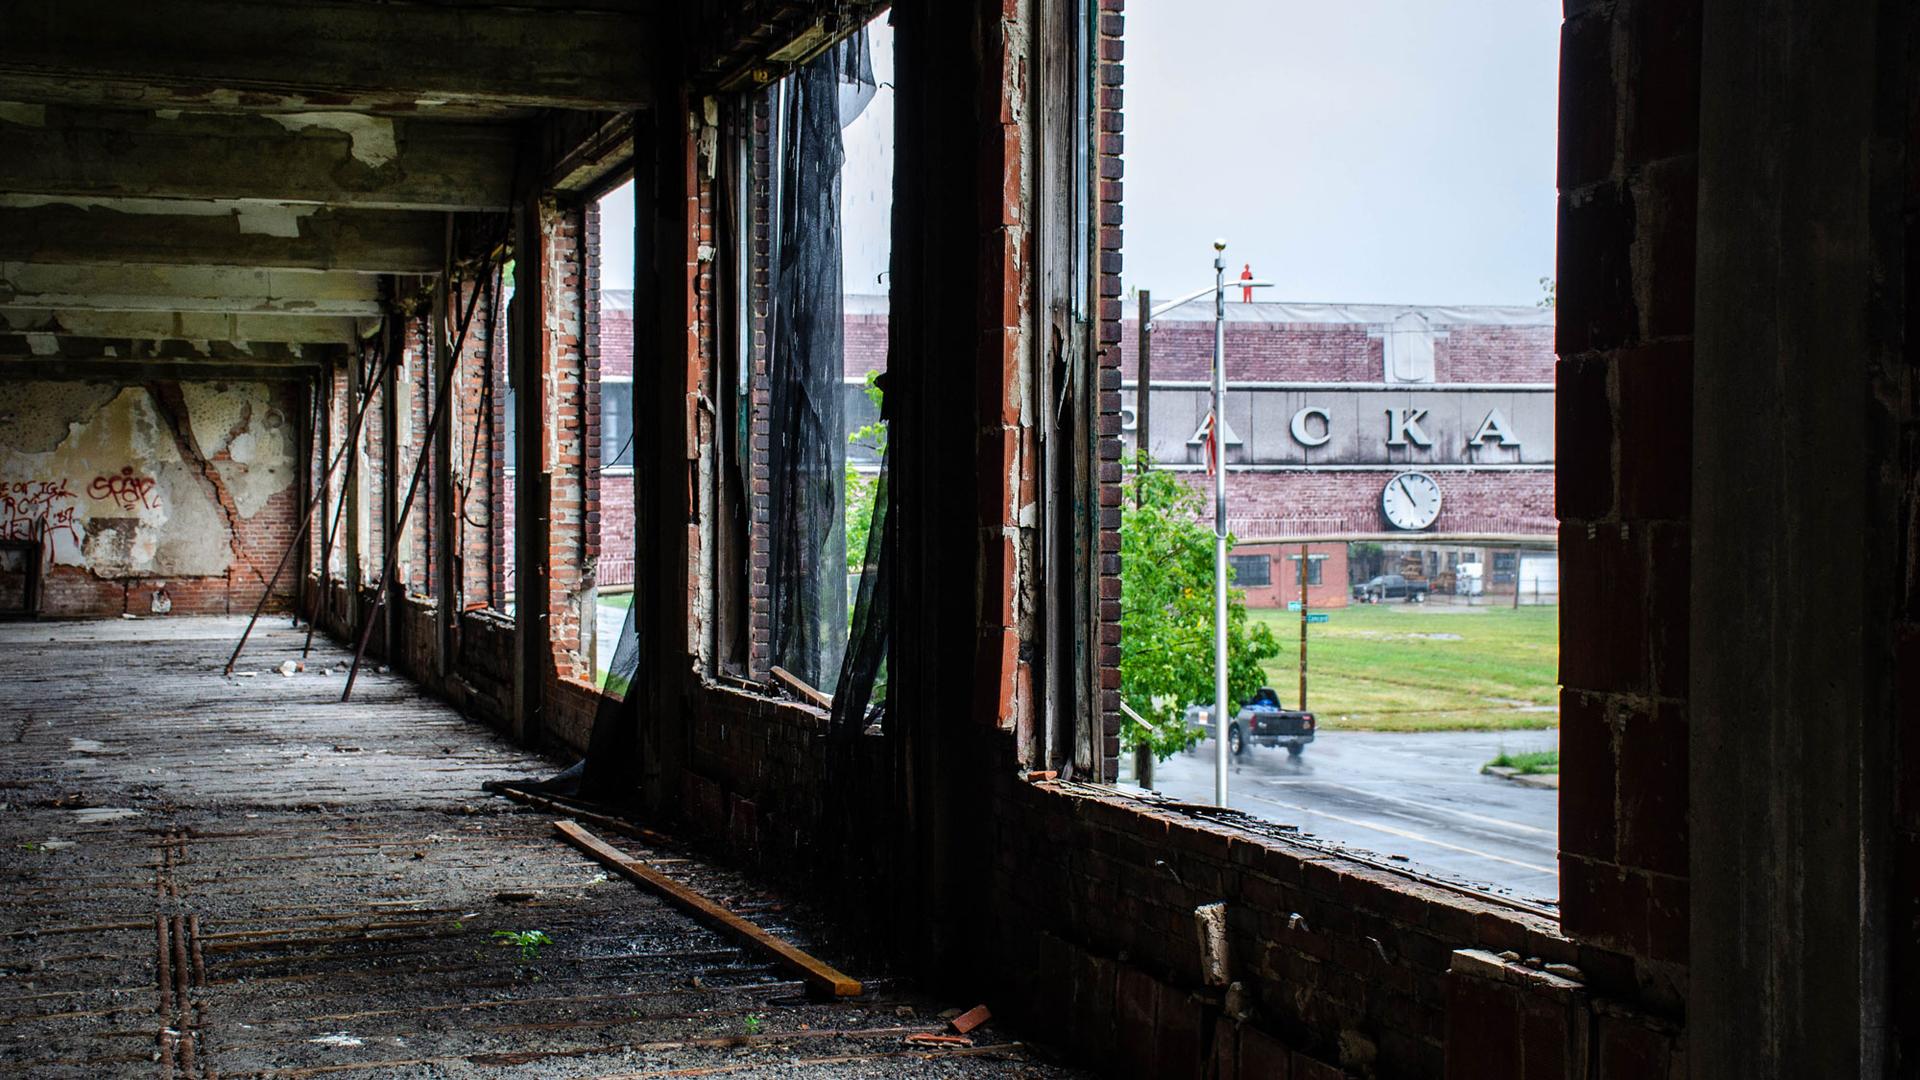 The lettering of the old Packard Plant in Detroit is seen on a brick bridge viewed through the ruins of a window in the factory.